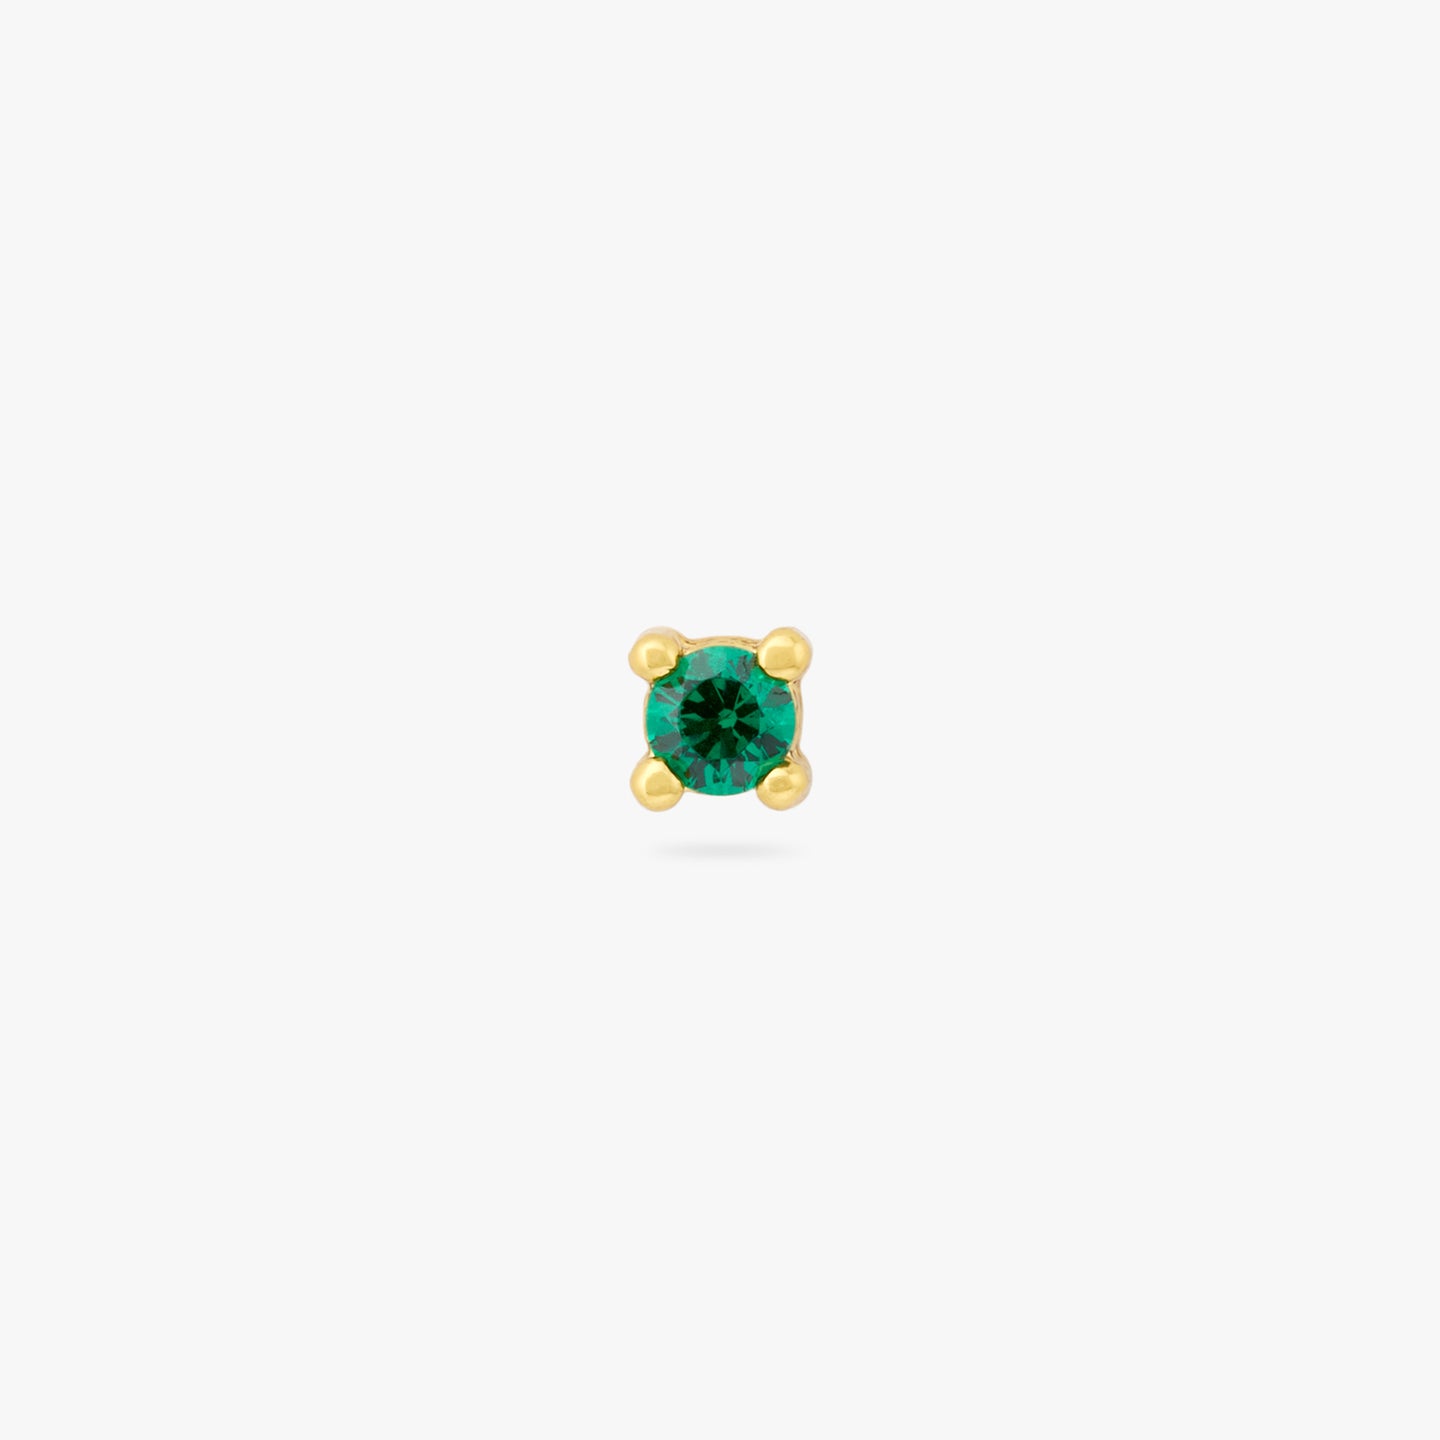 A mini gold stud with a green cz gem color:null|gold/green